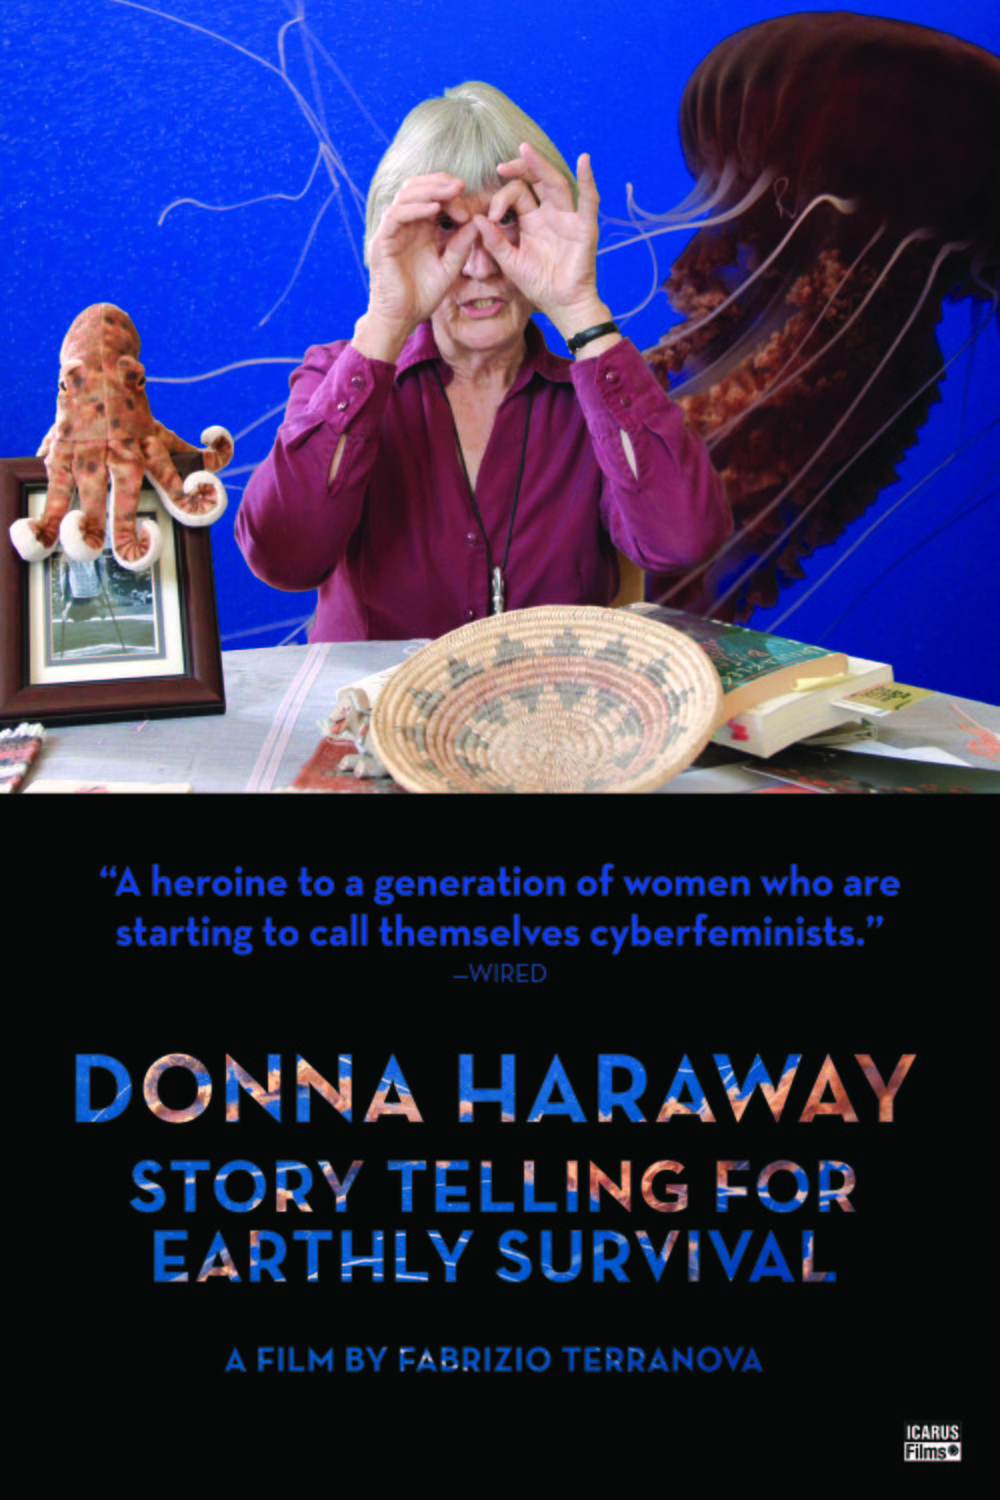 L'affiche du film Donna Haraway: Story Telling for Earthly Survival